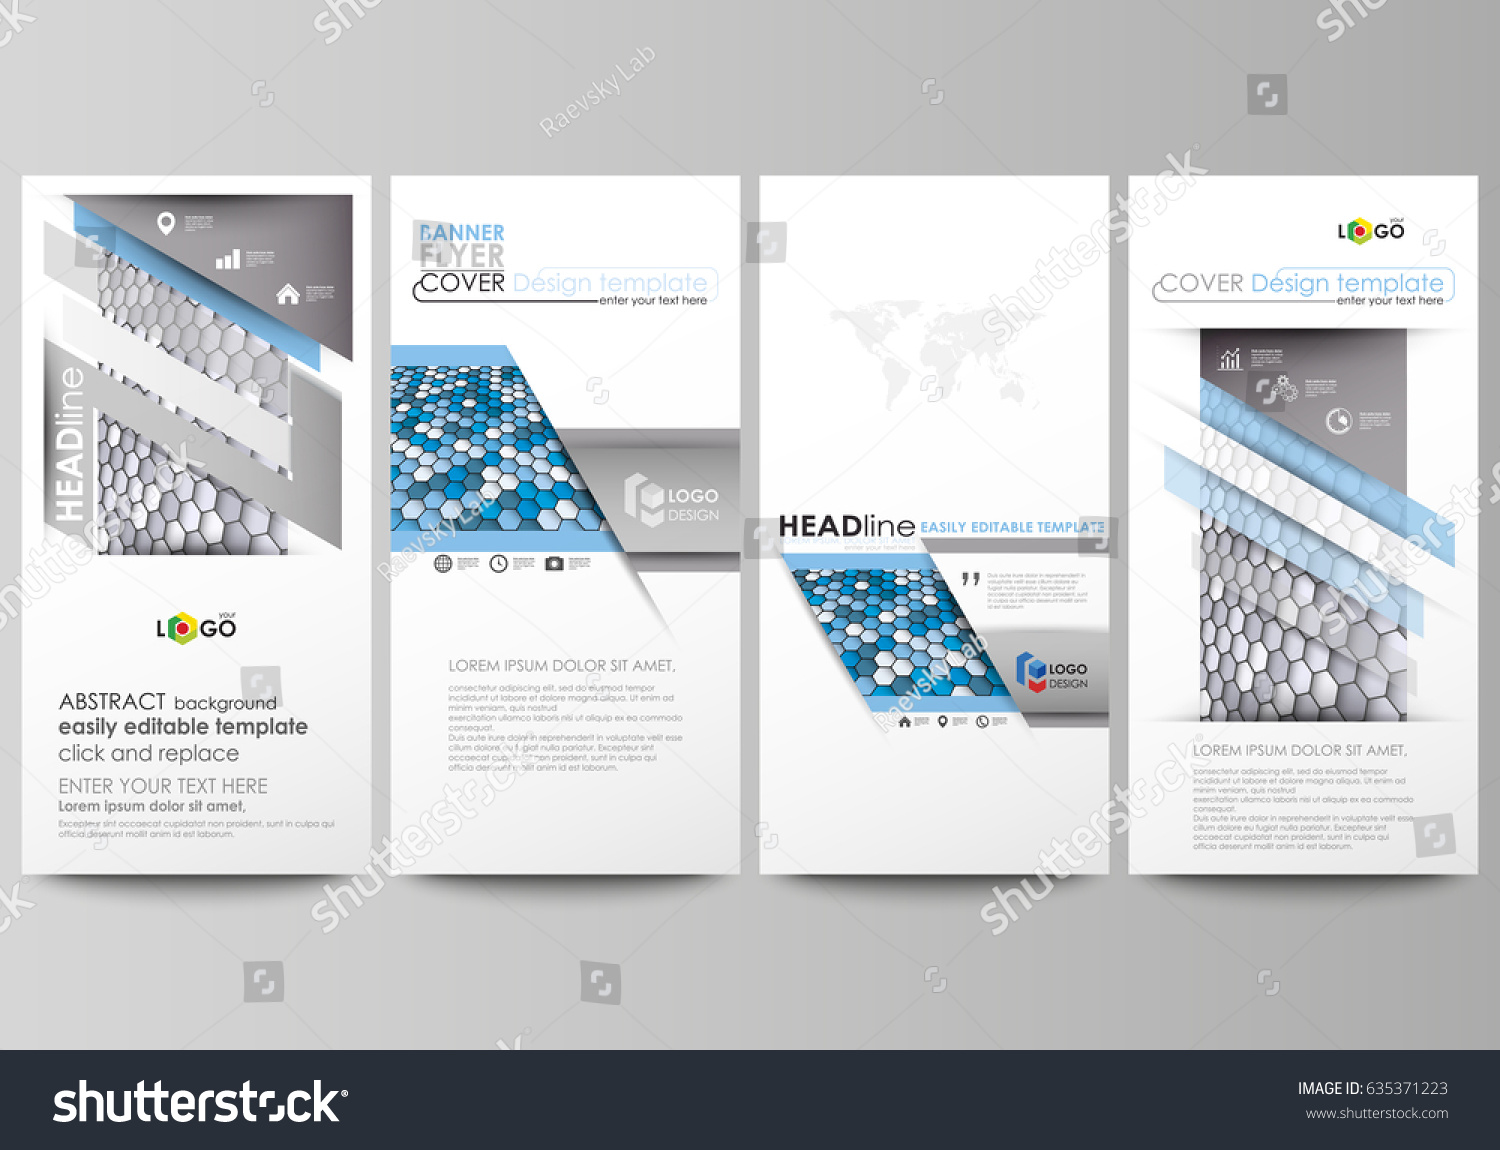 Flyers set, modern banners. Business templates. Cover design template, easy editable vector layouts. Blue and gray color hexagons in perspective. Abstract polygonal style background. #635371223